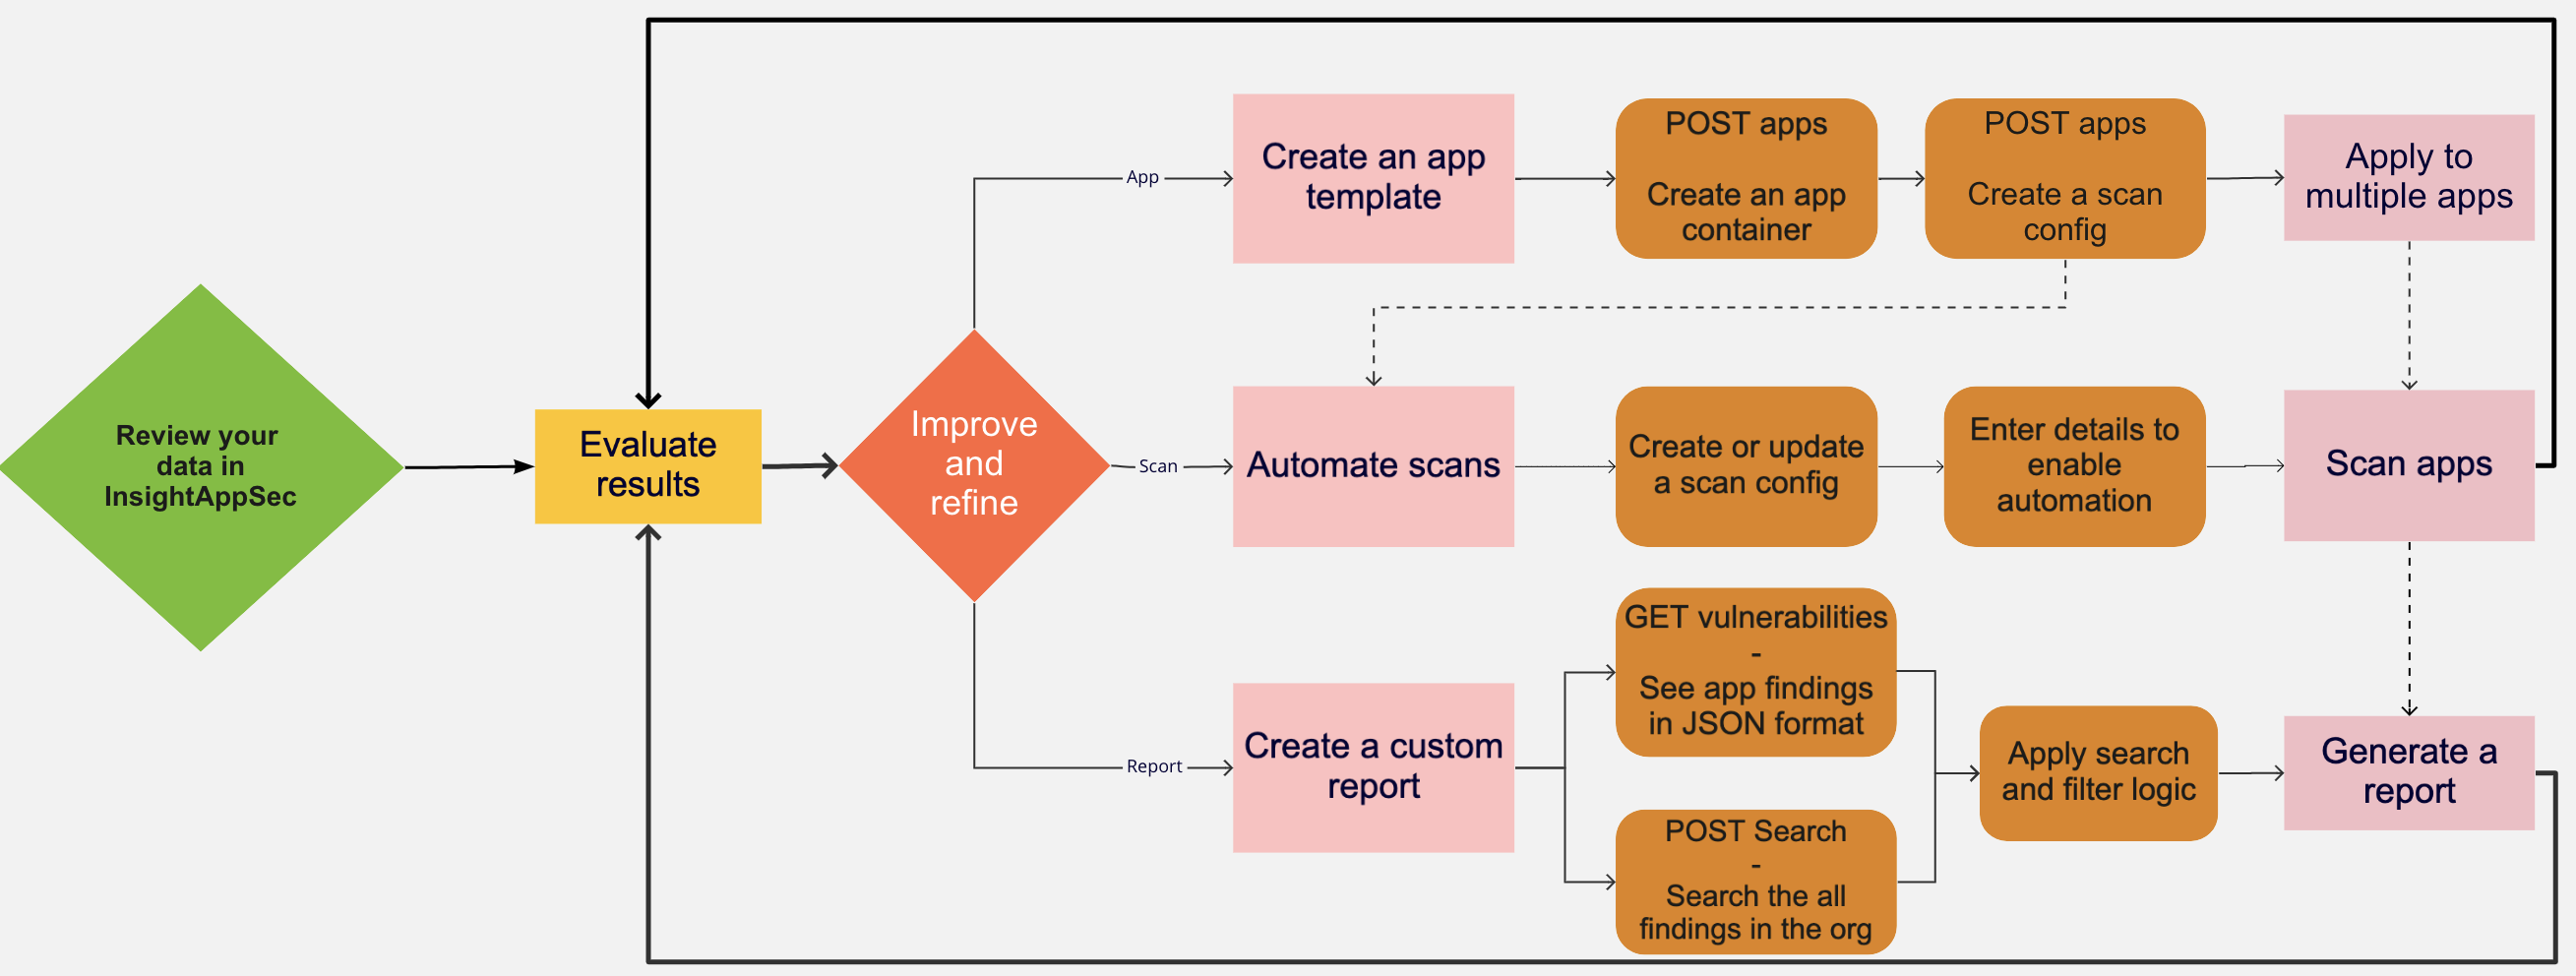 Workflow of the three use cases provided